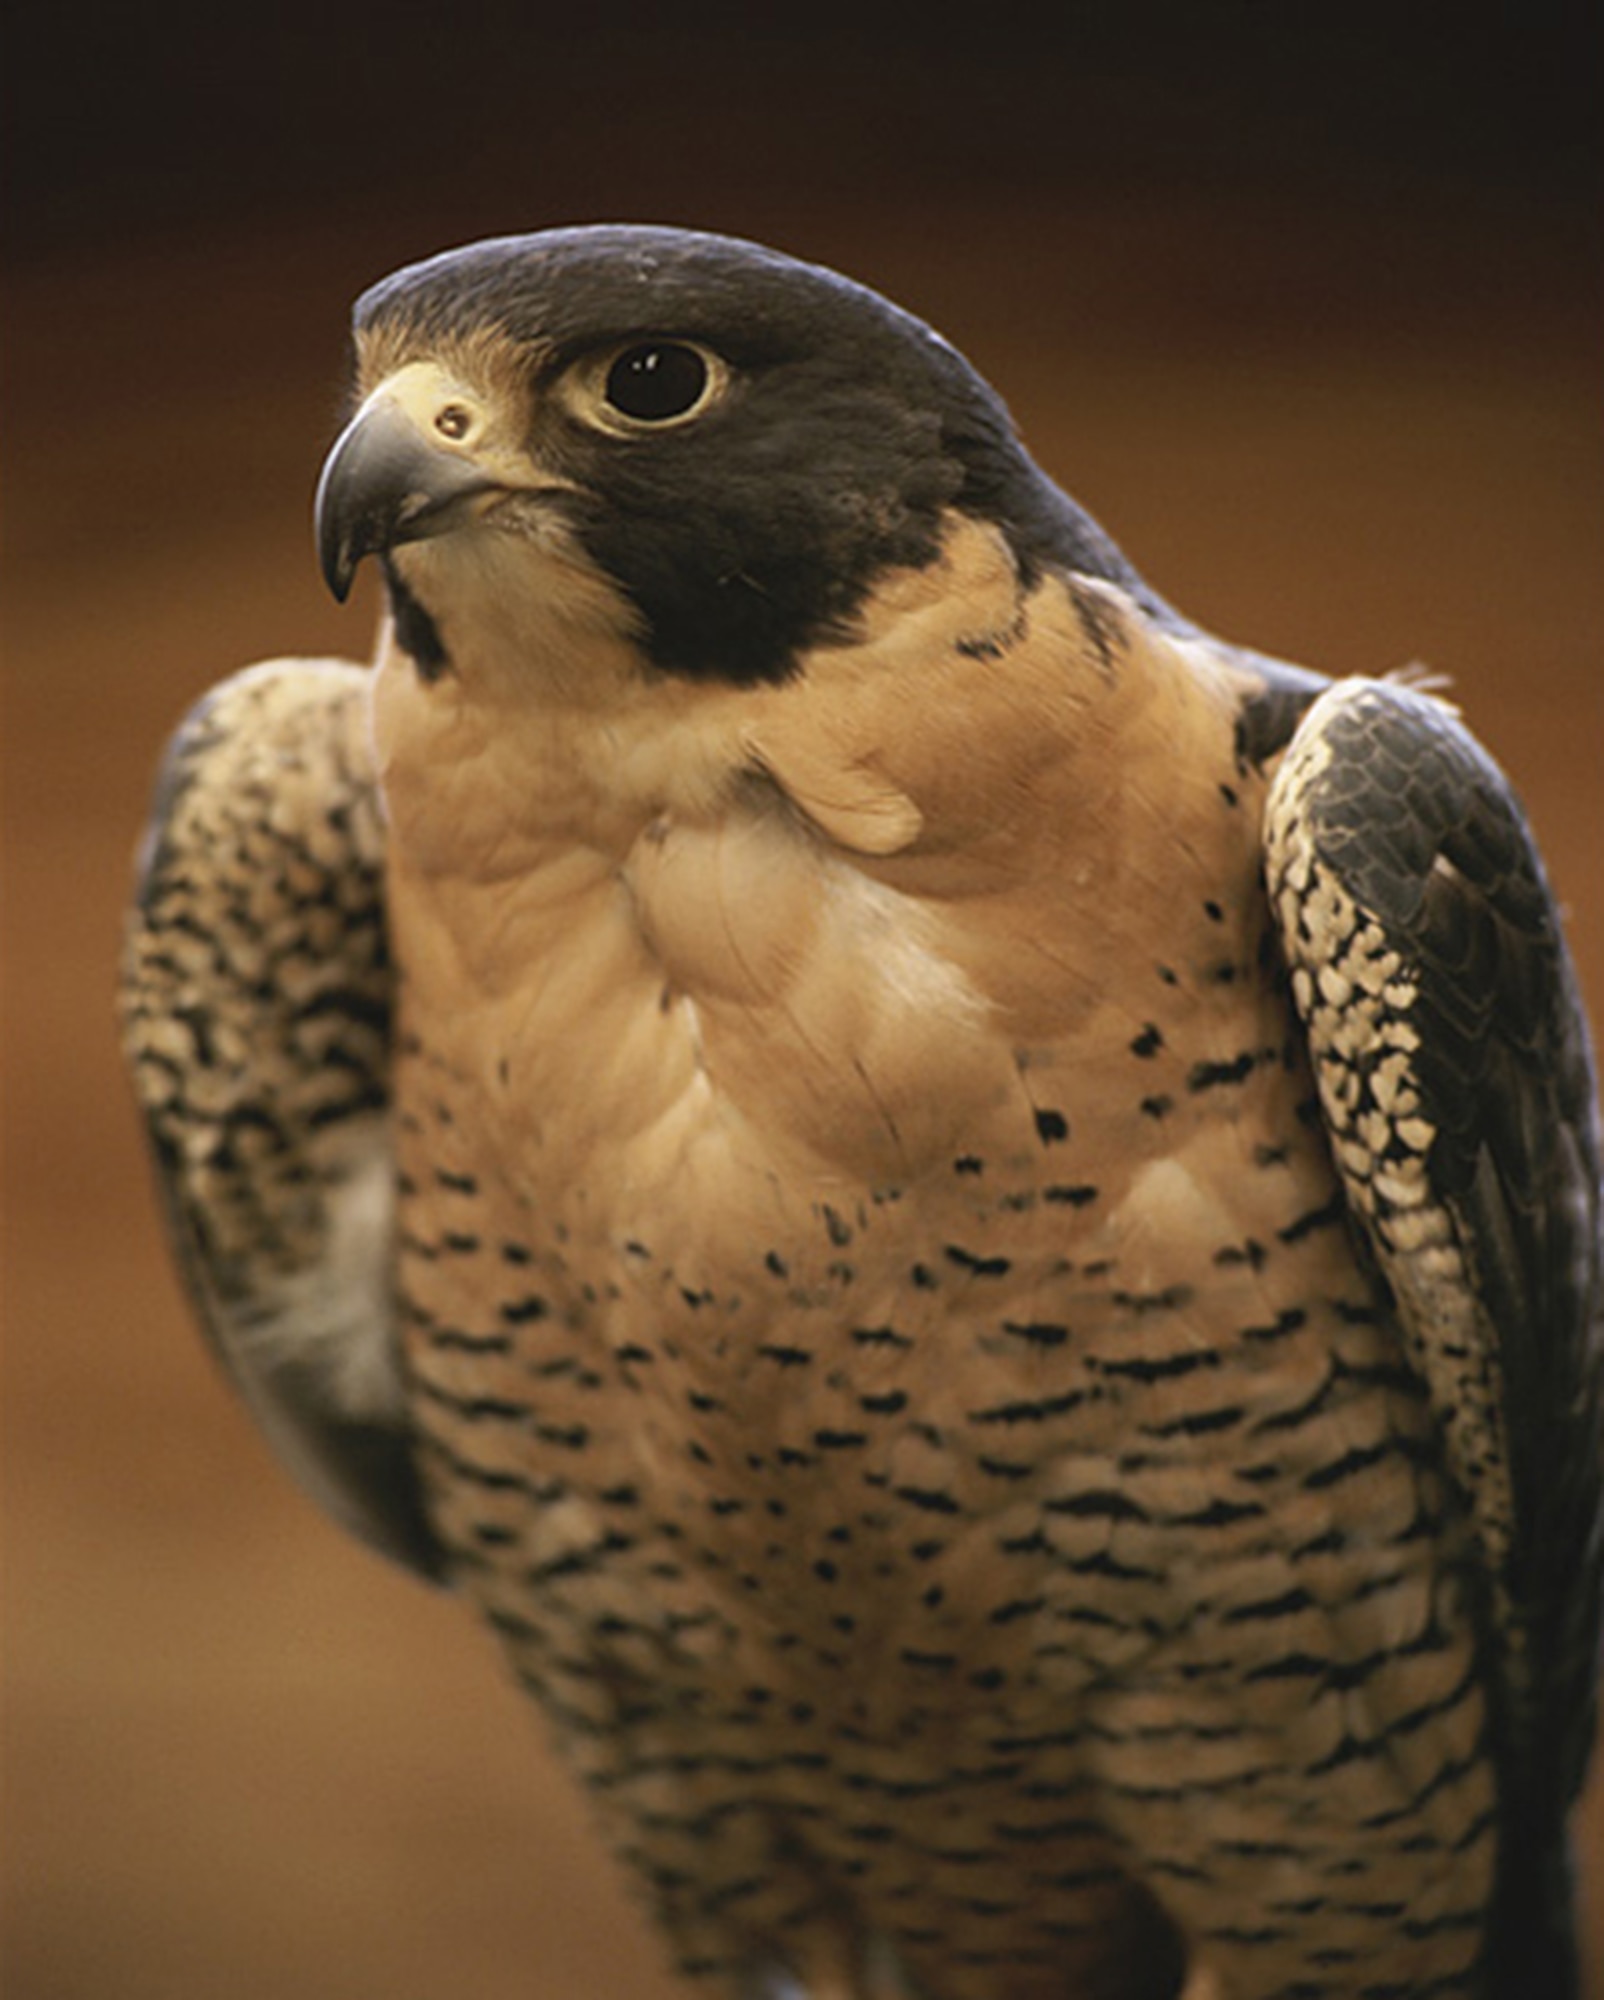 This peregrine falcon is similar to one of the falcons that will be used for the McConnell AFB, Kan., bird aircraft strike hazard program. (Courtesy of the National Geographic Society)